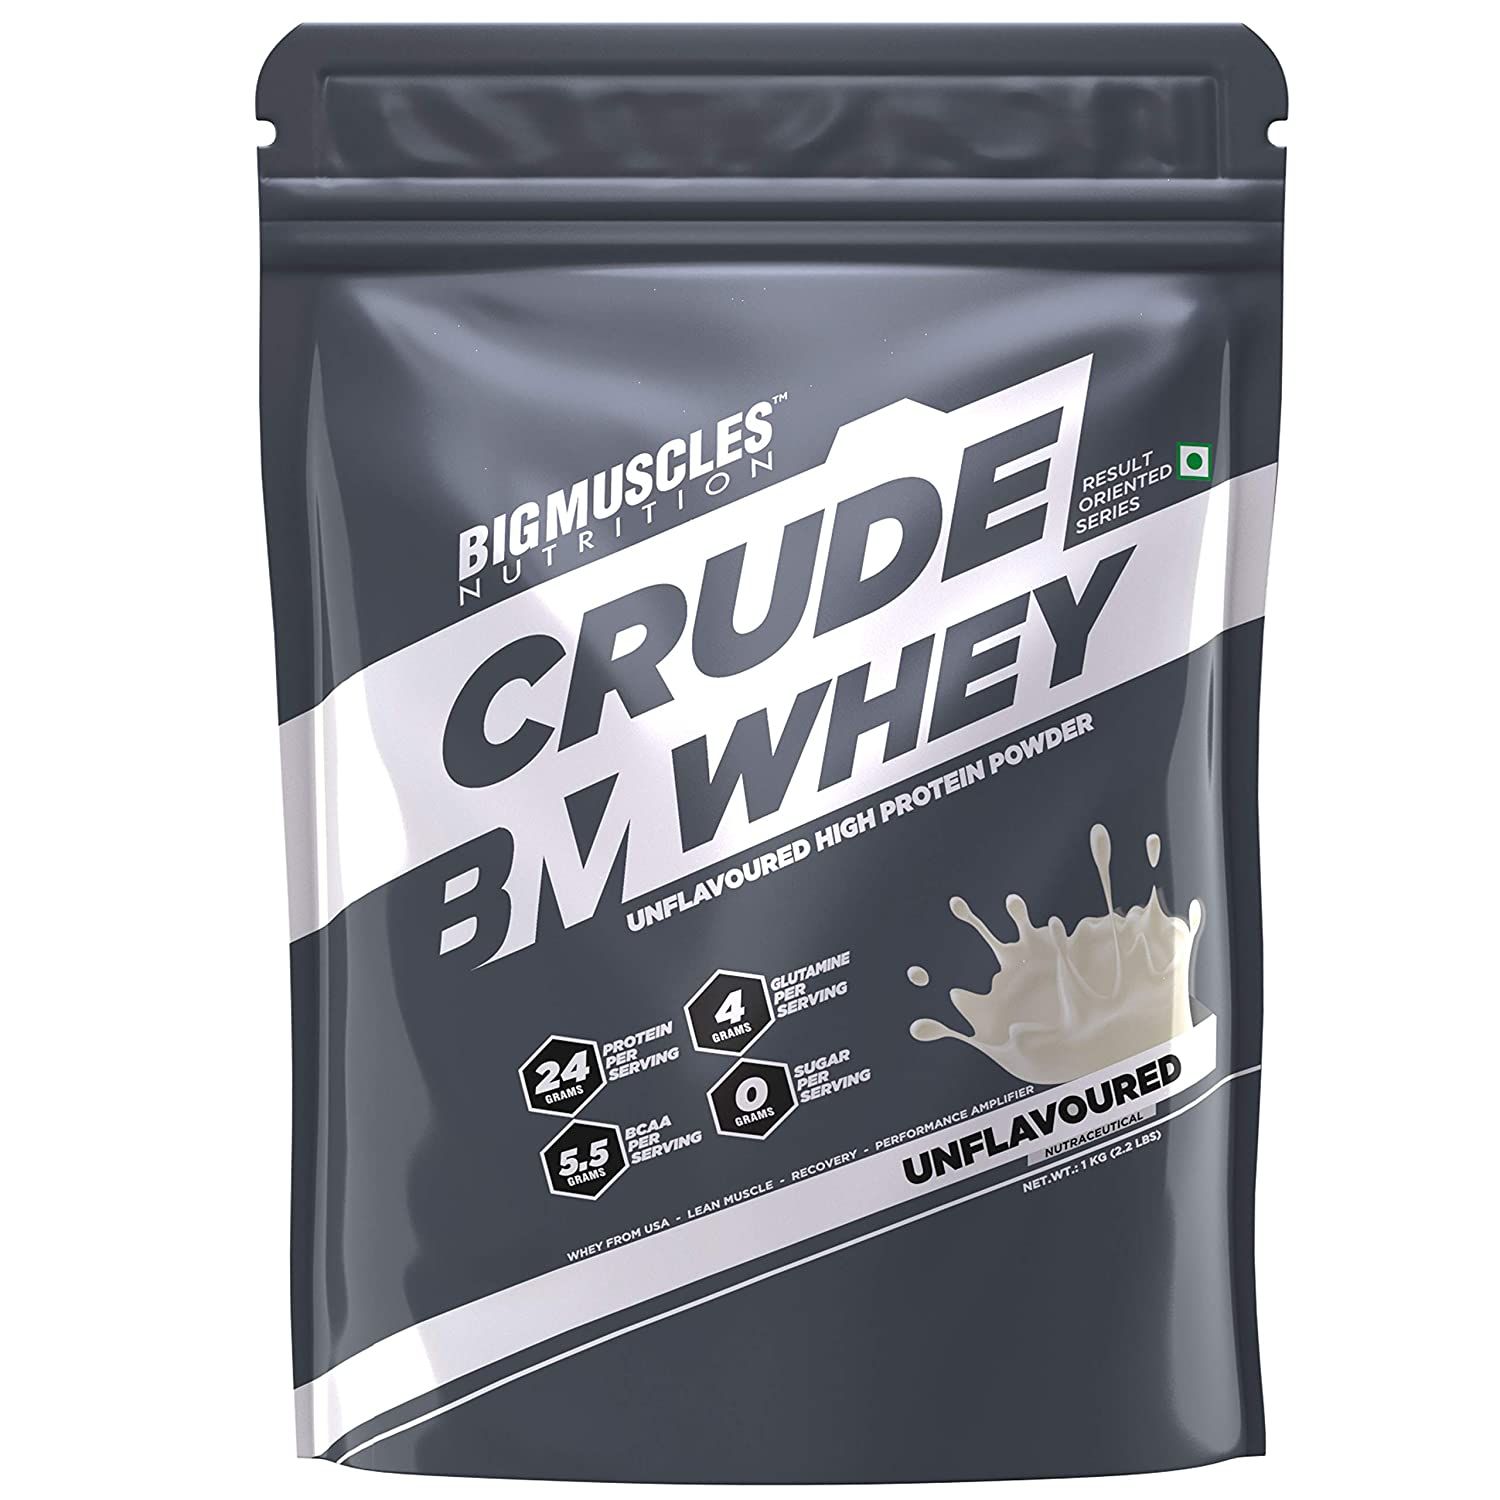 BigMuscles Nutrition Crude Whey Image